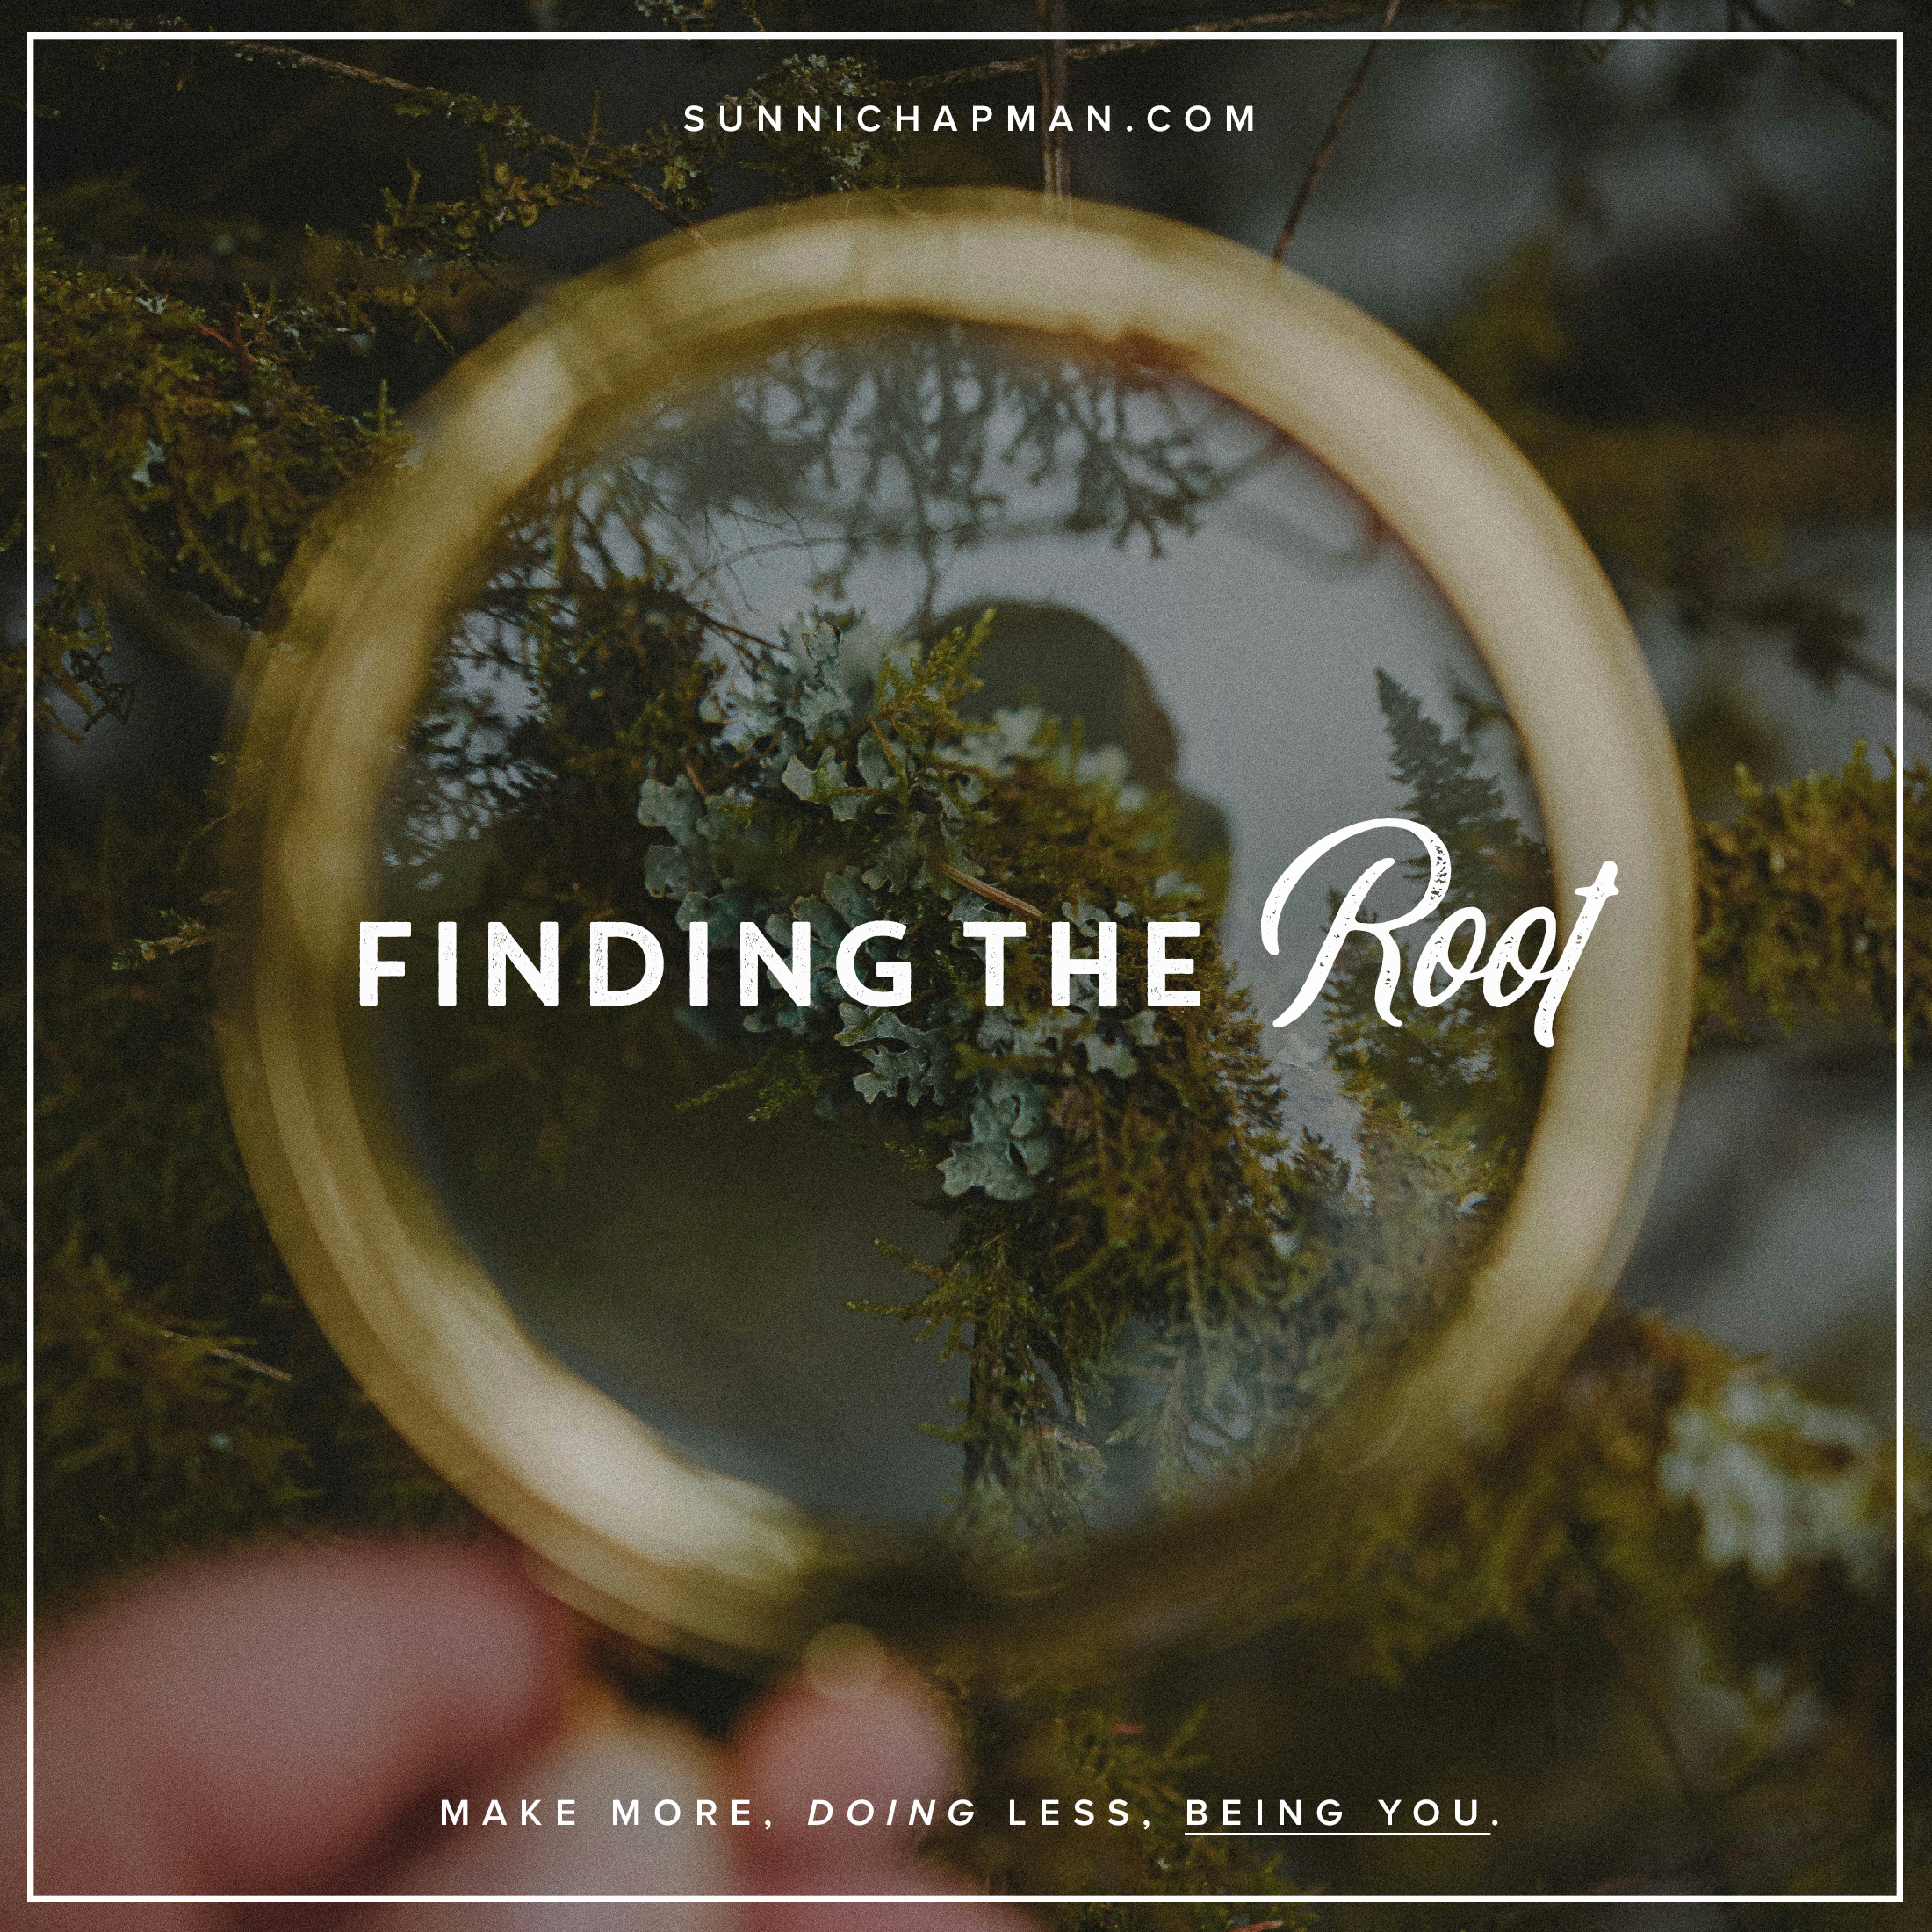 An image featuring a circular mirror held in a forest, reflecting dense green foliage. Overlaid text reads 'FINDING THE ROOT' in bold, white font, followed by 'MAKE MORE, DOING LESS, BEING YOU.' in a smaller script. The website 'SUNNICHAPMAN.COM' is displayed at the top.